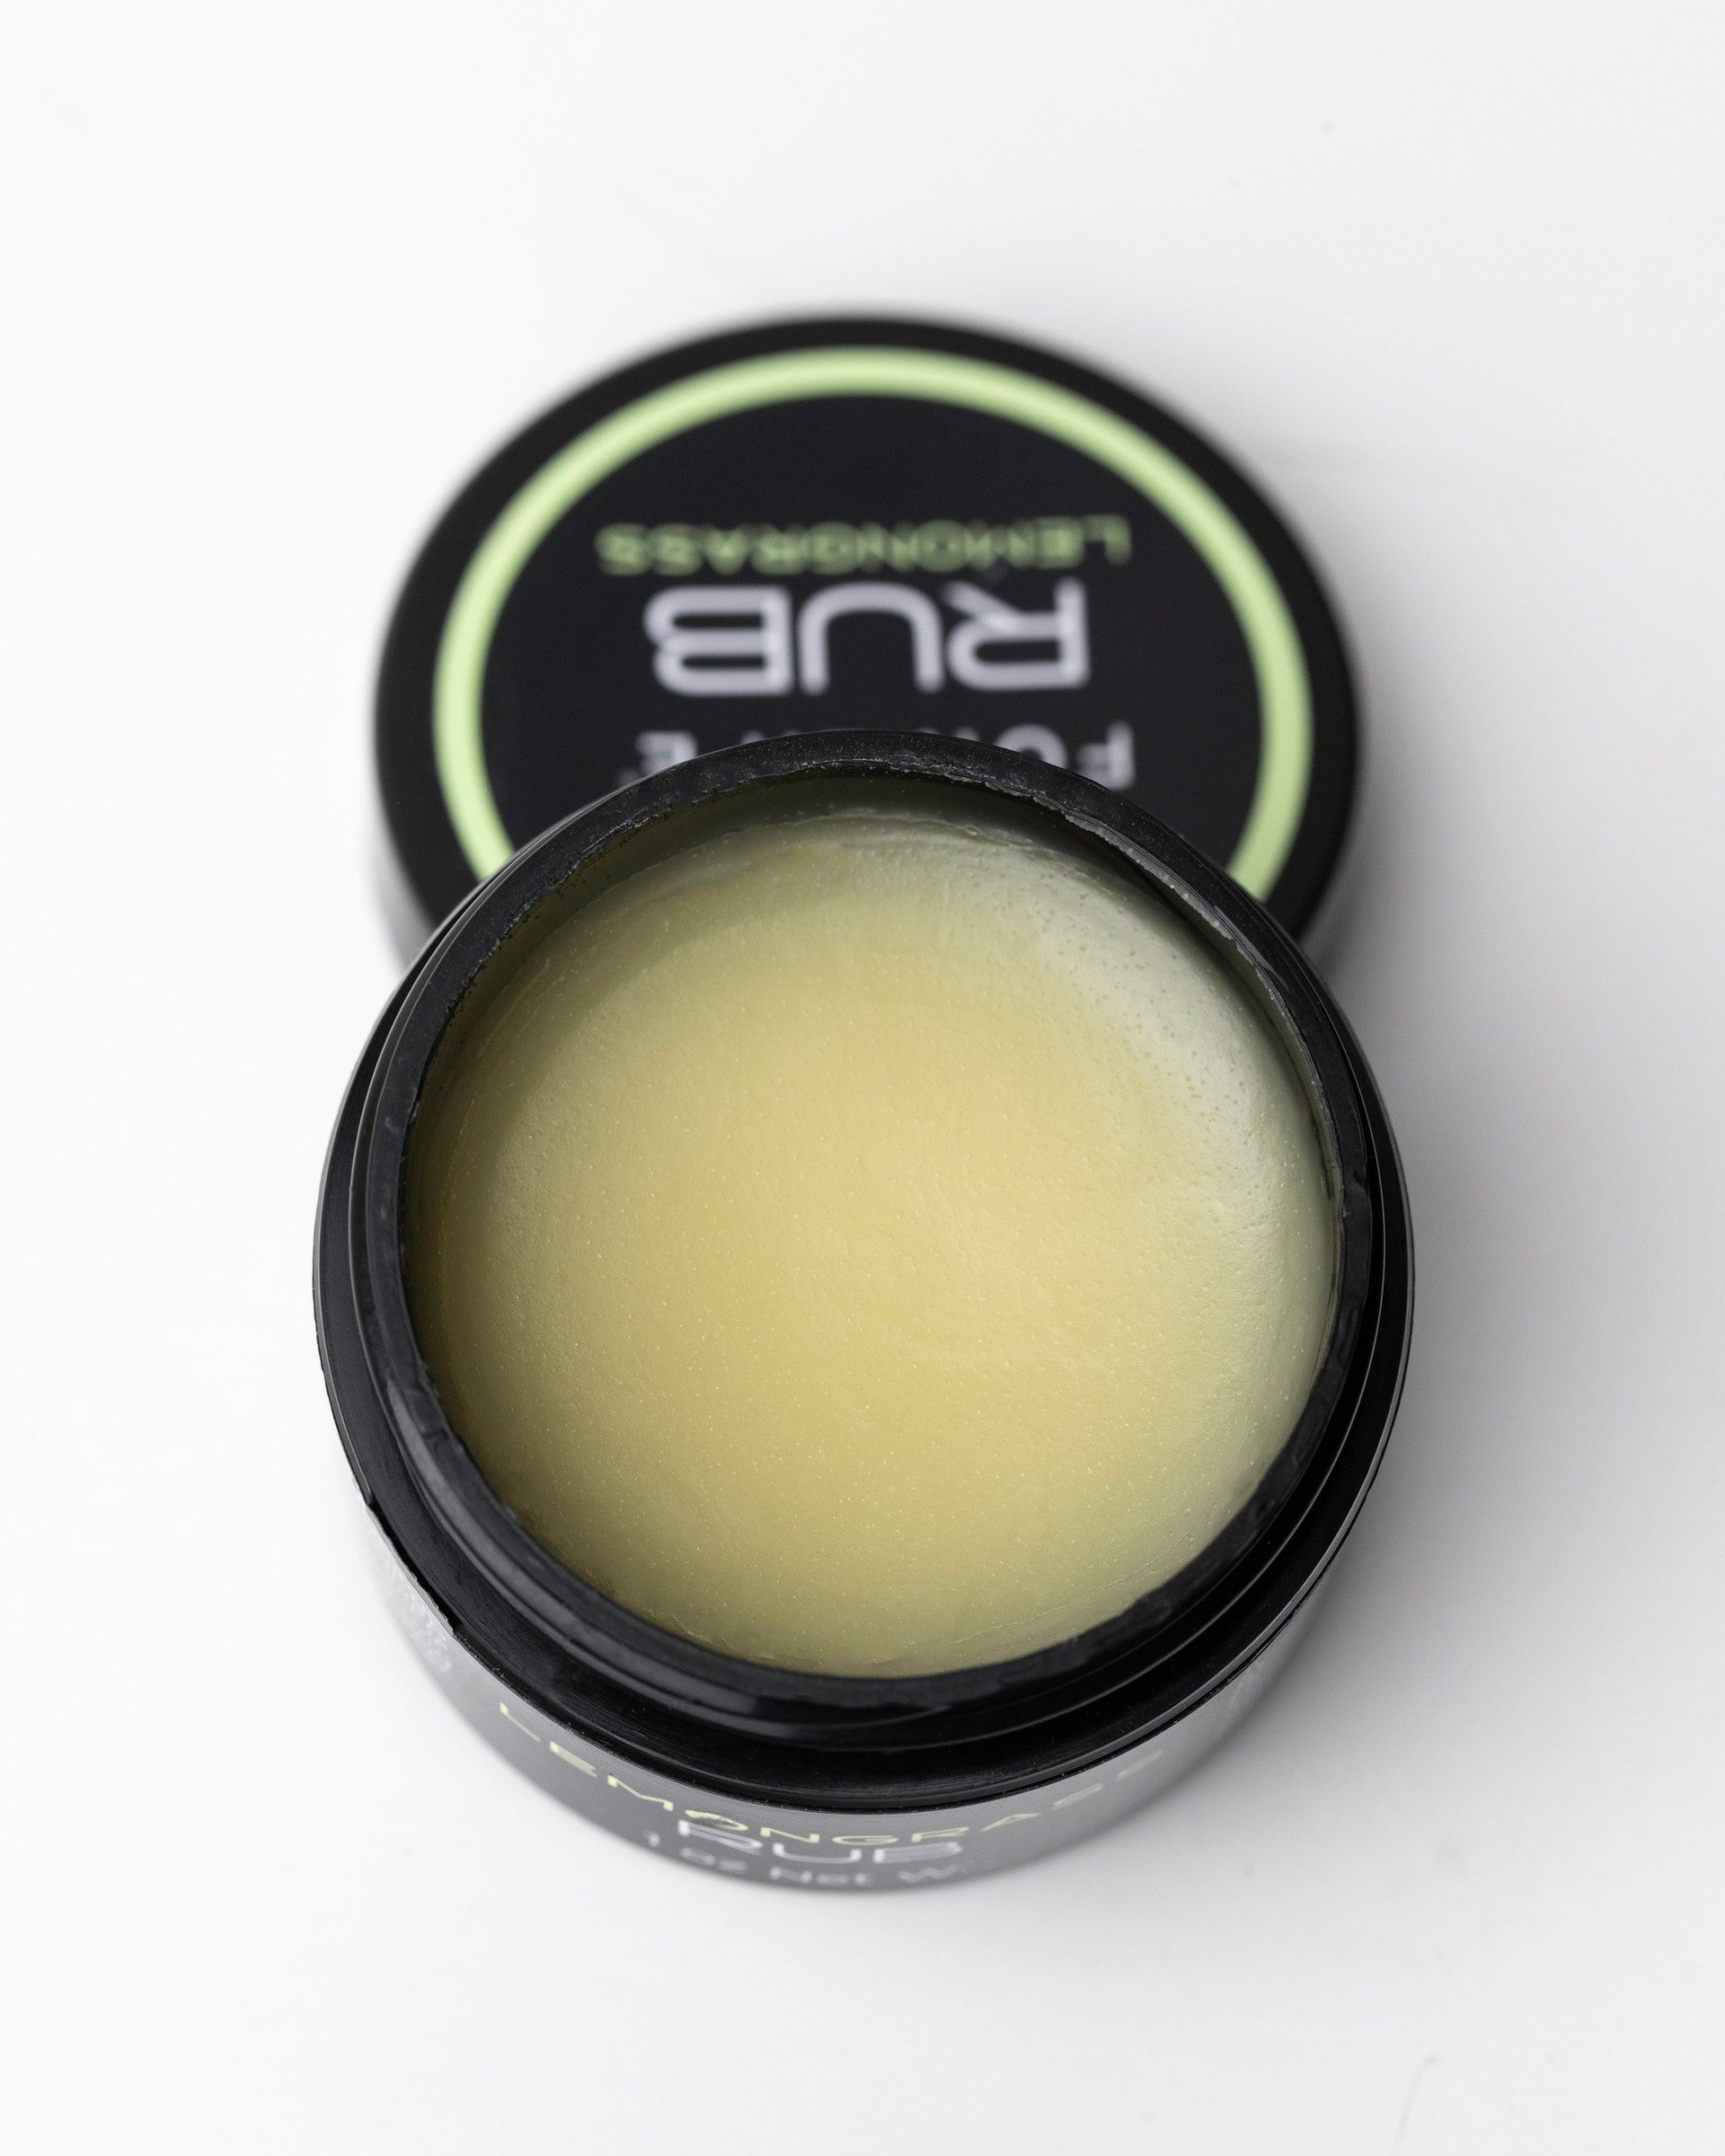 Reduces inflammation causing deep muscle pain and body aches muscle rub. Combines CBD with bees wax, camphor, cajuput oil, menthol, lanolin, cassia oil, eucalyptus oil, mint oil and clove oil for rapid absorption and deep penetration into the body.